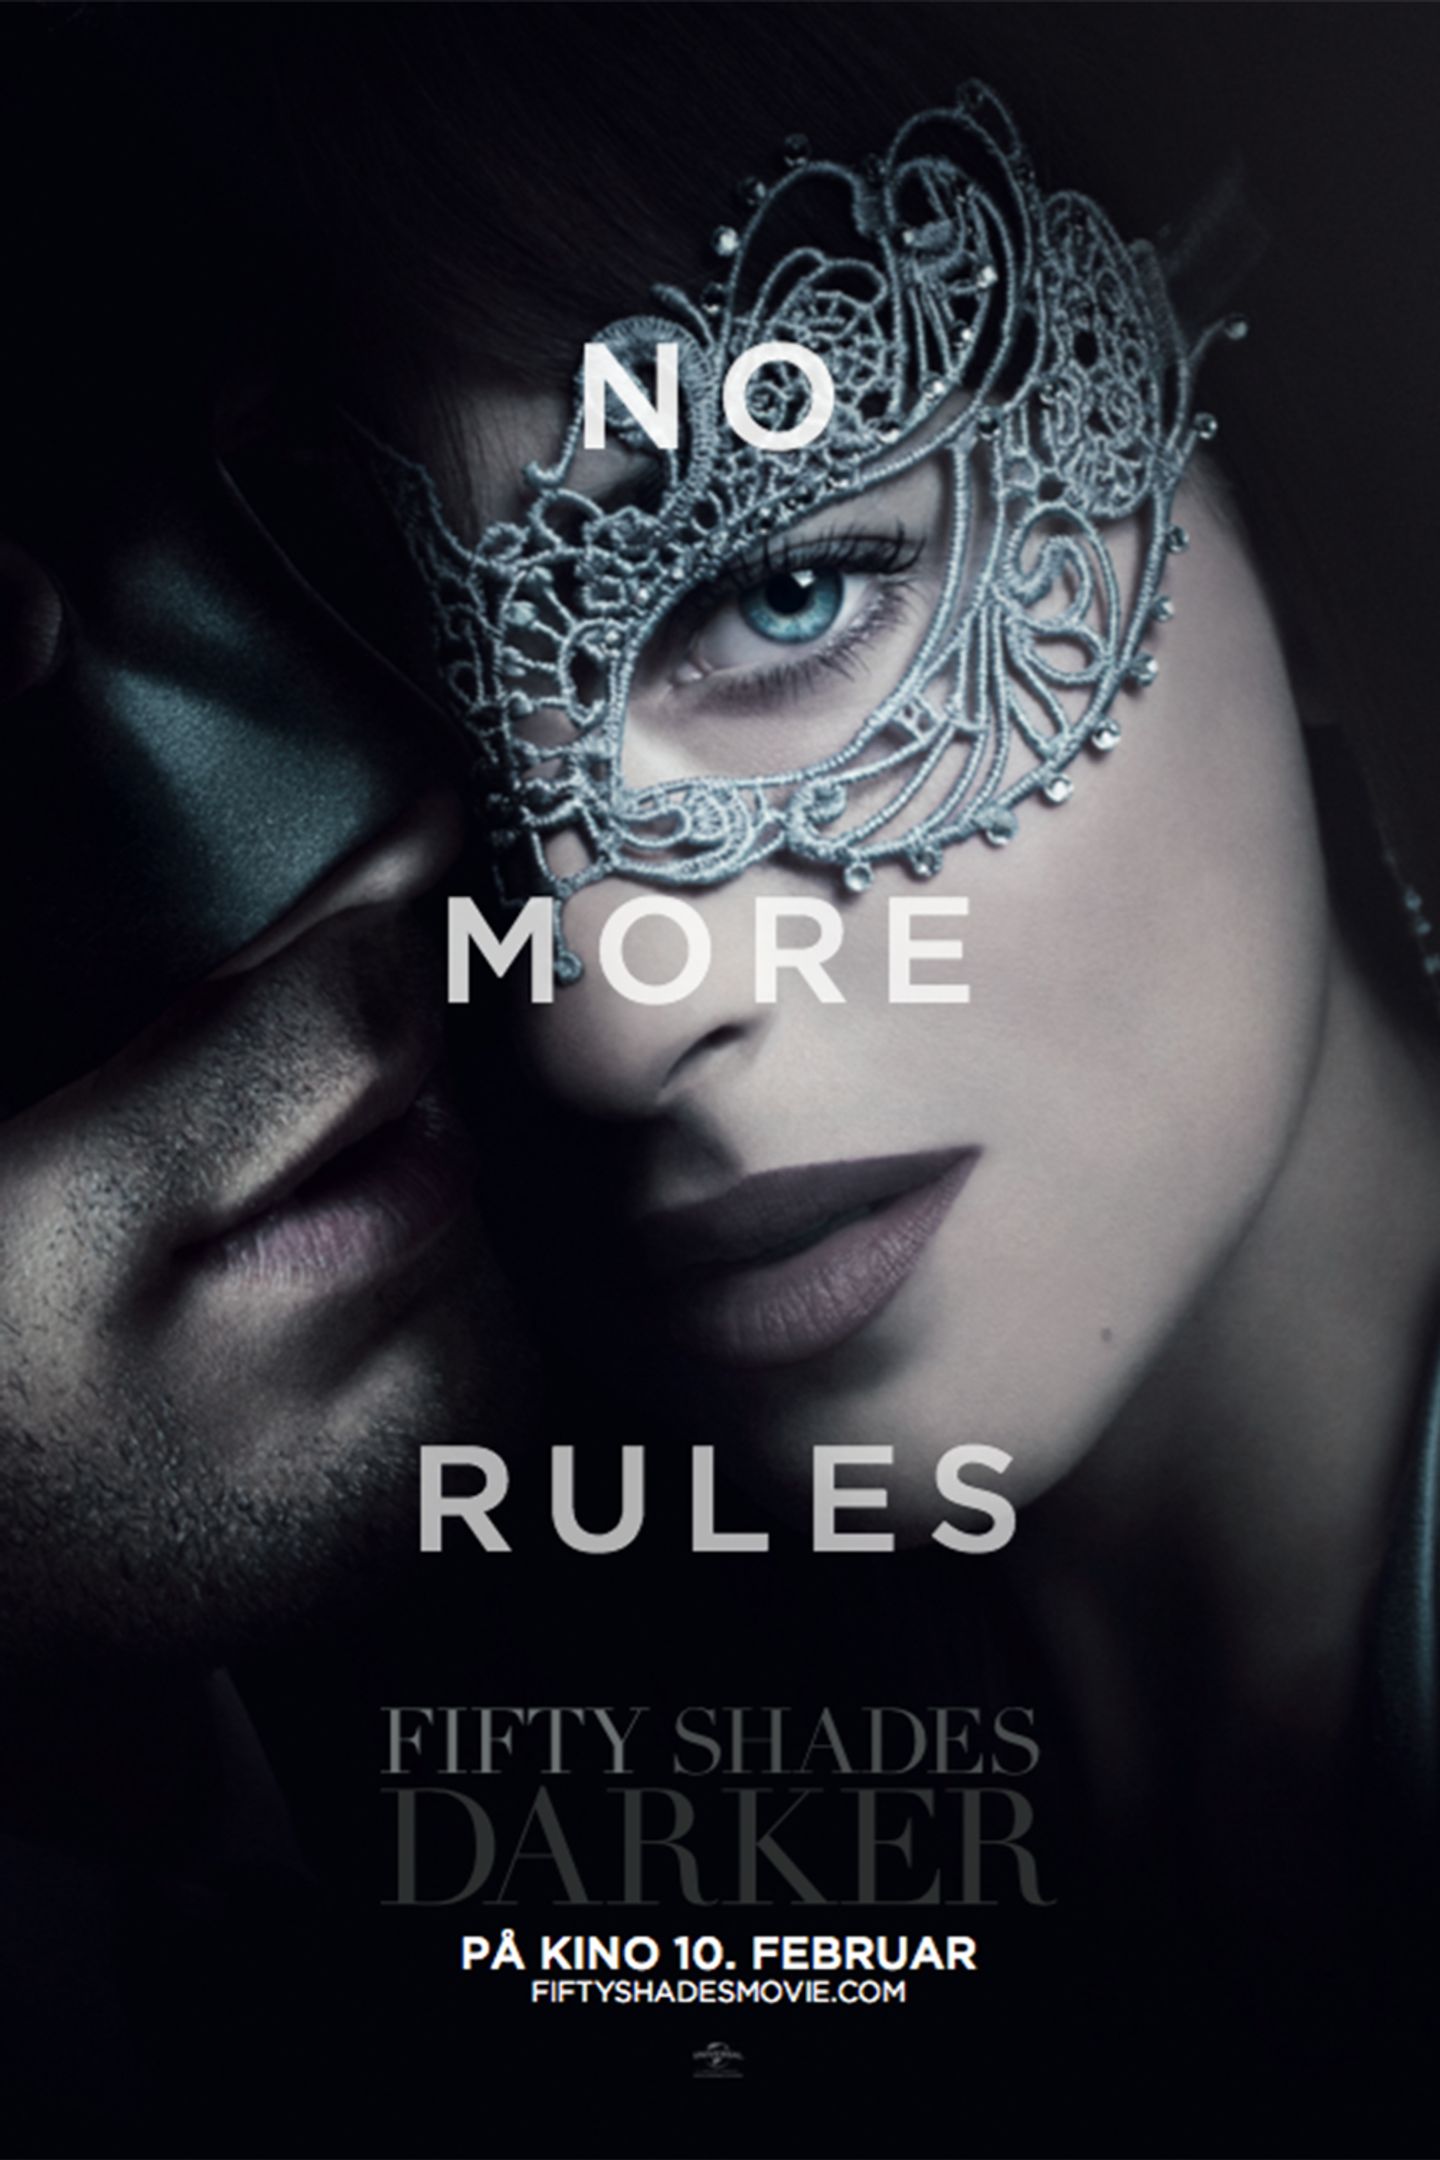 Plakat for 'Fifty Shades Darker'